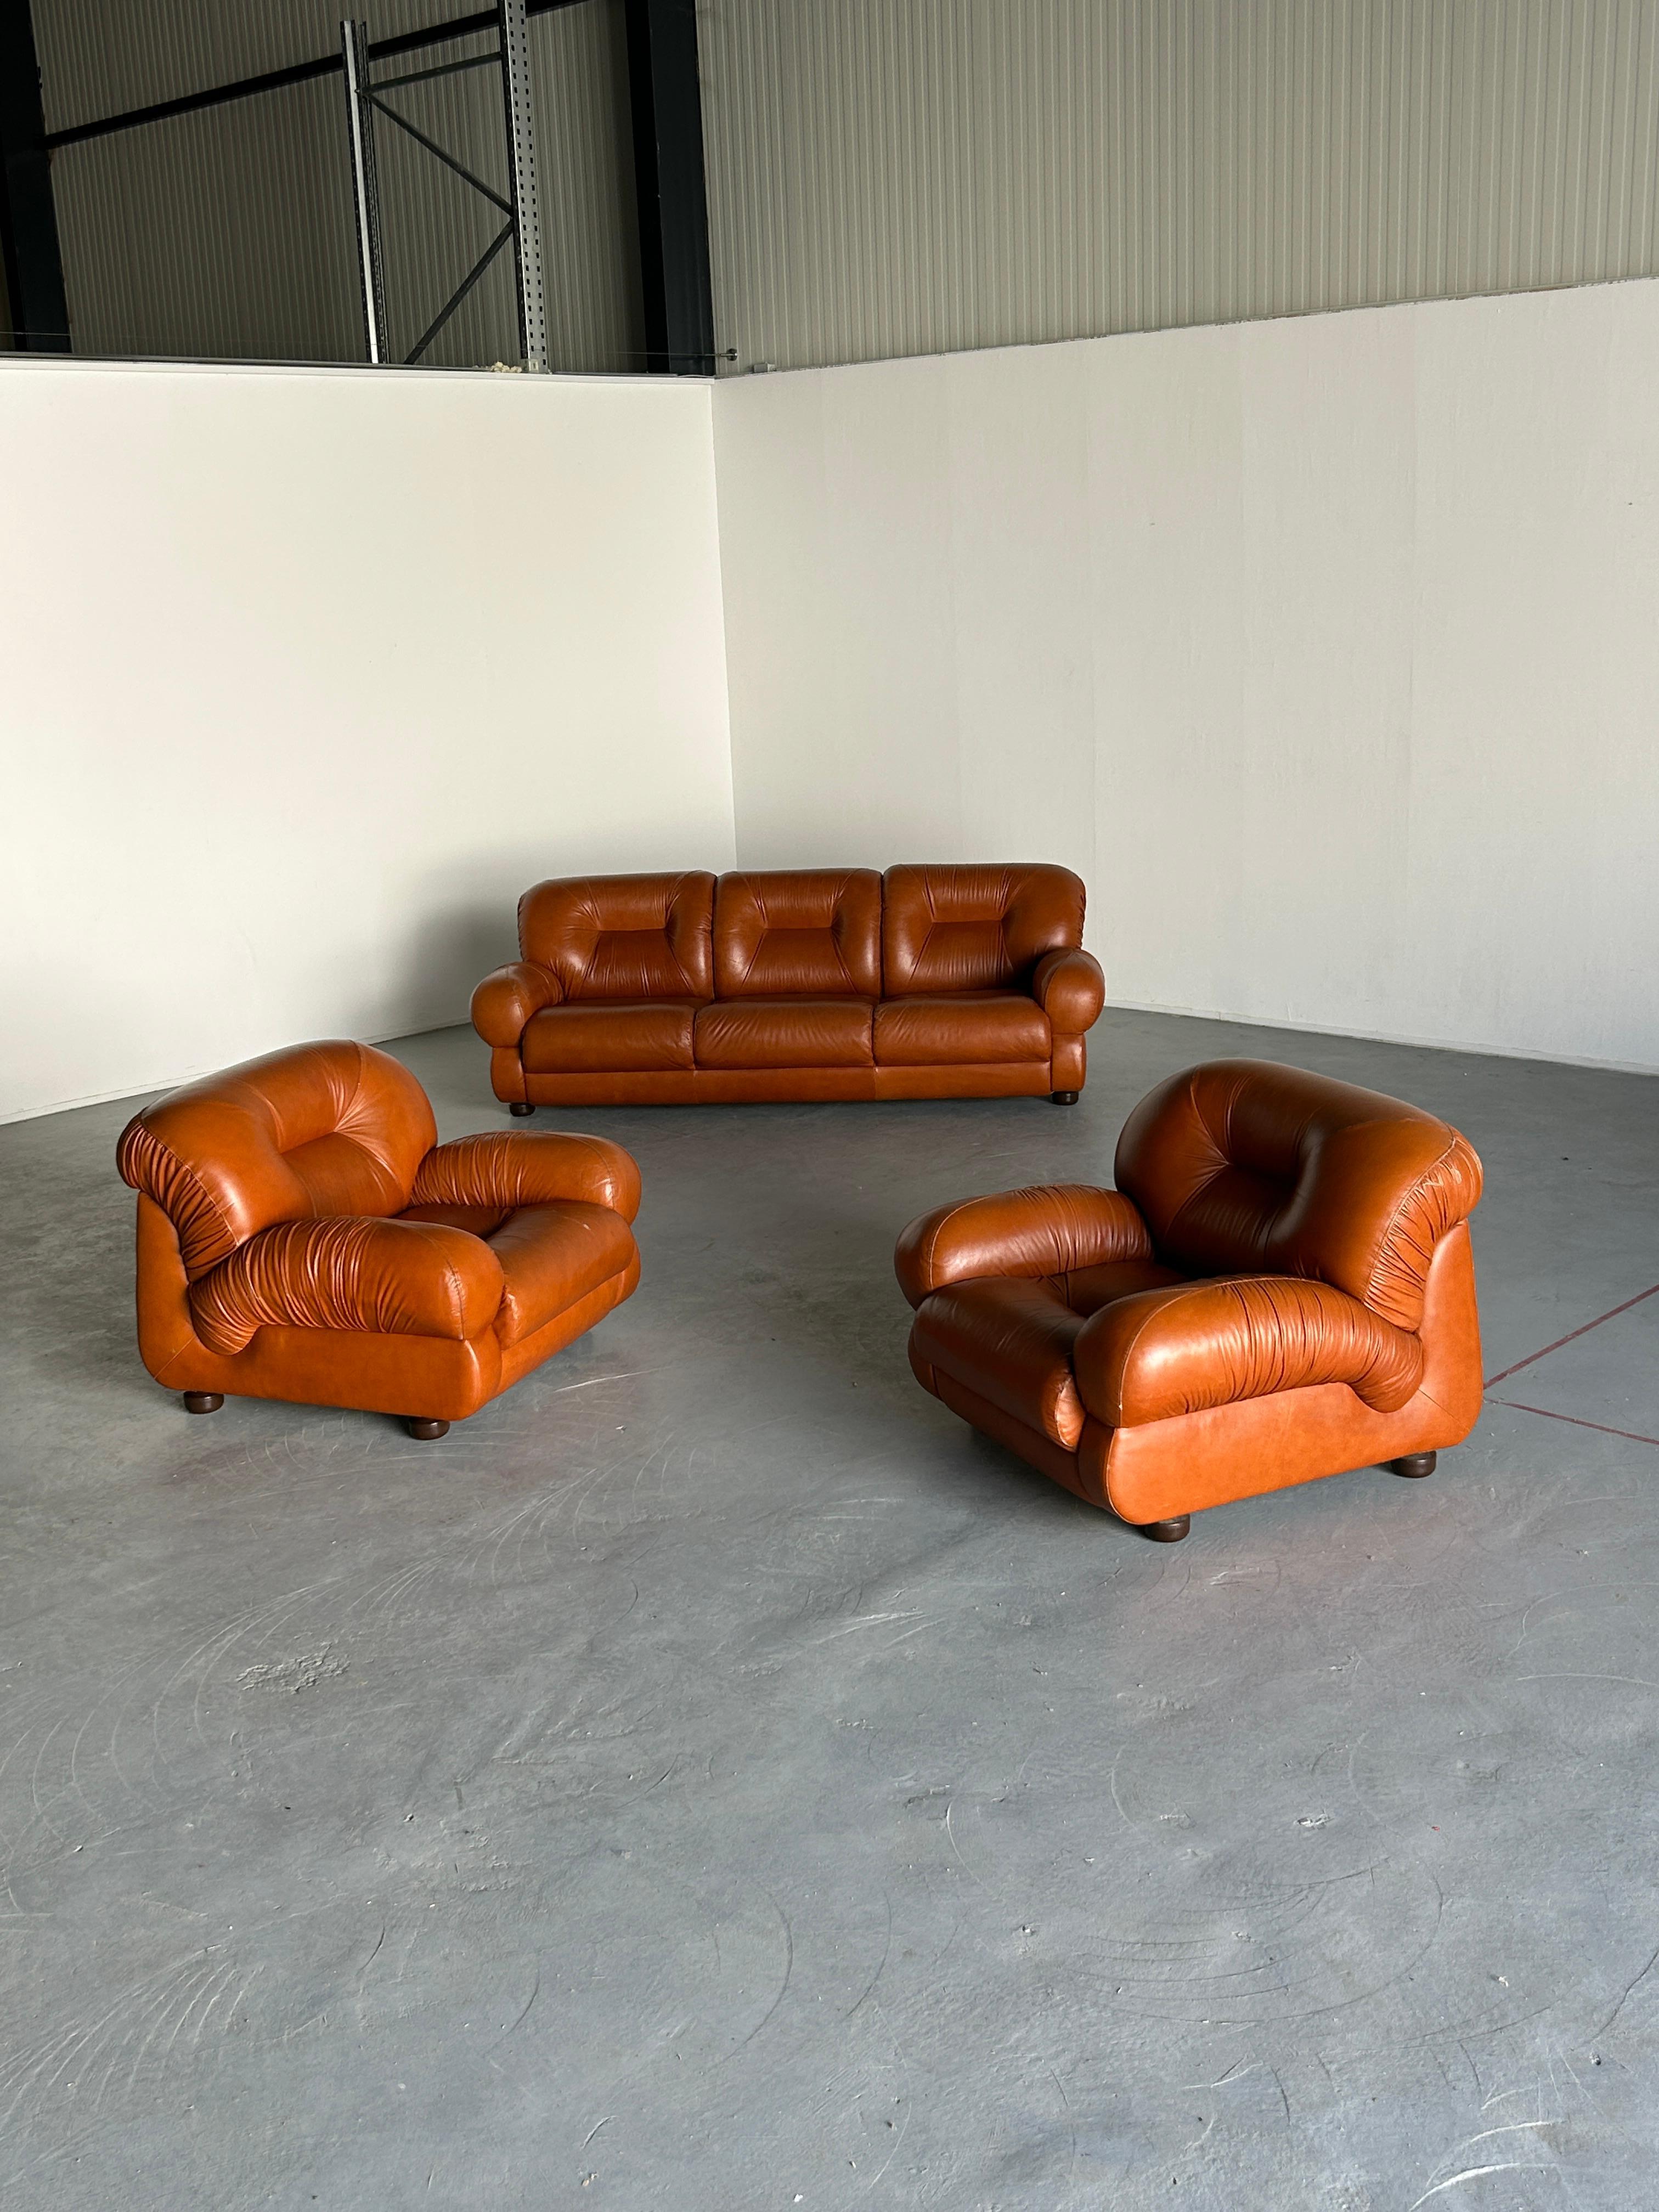 Vintage Italian Ruched Cognac Leather Mid-Century Modern Seating Set, 1970s For Sale 2